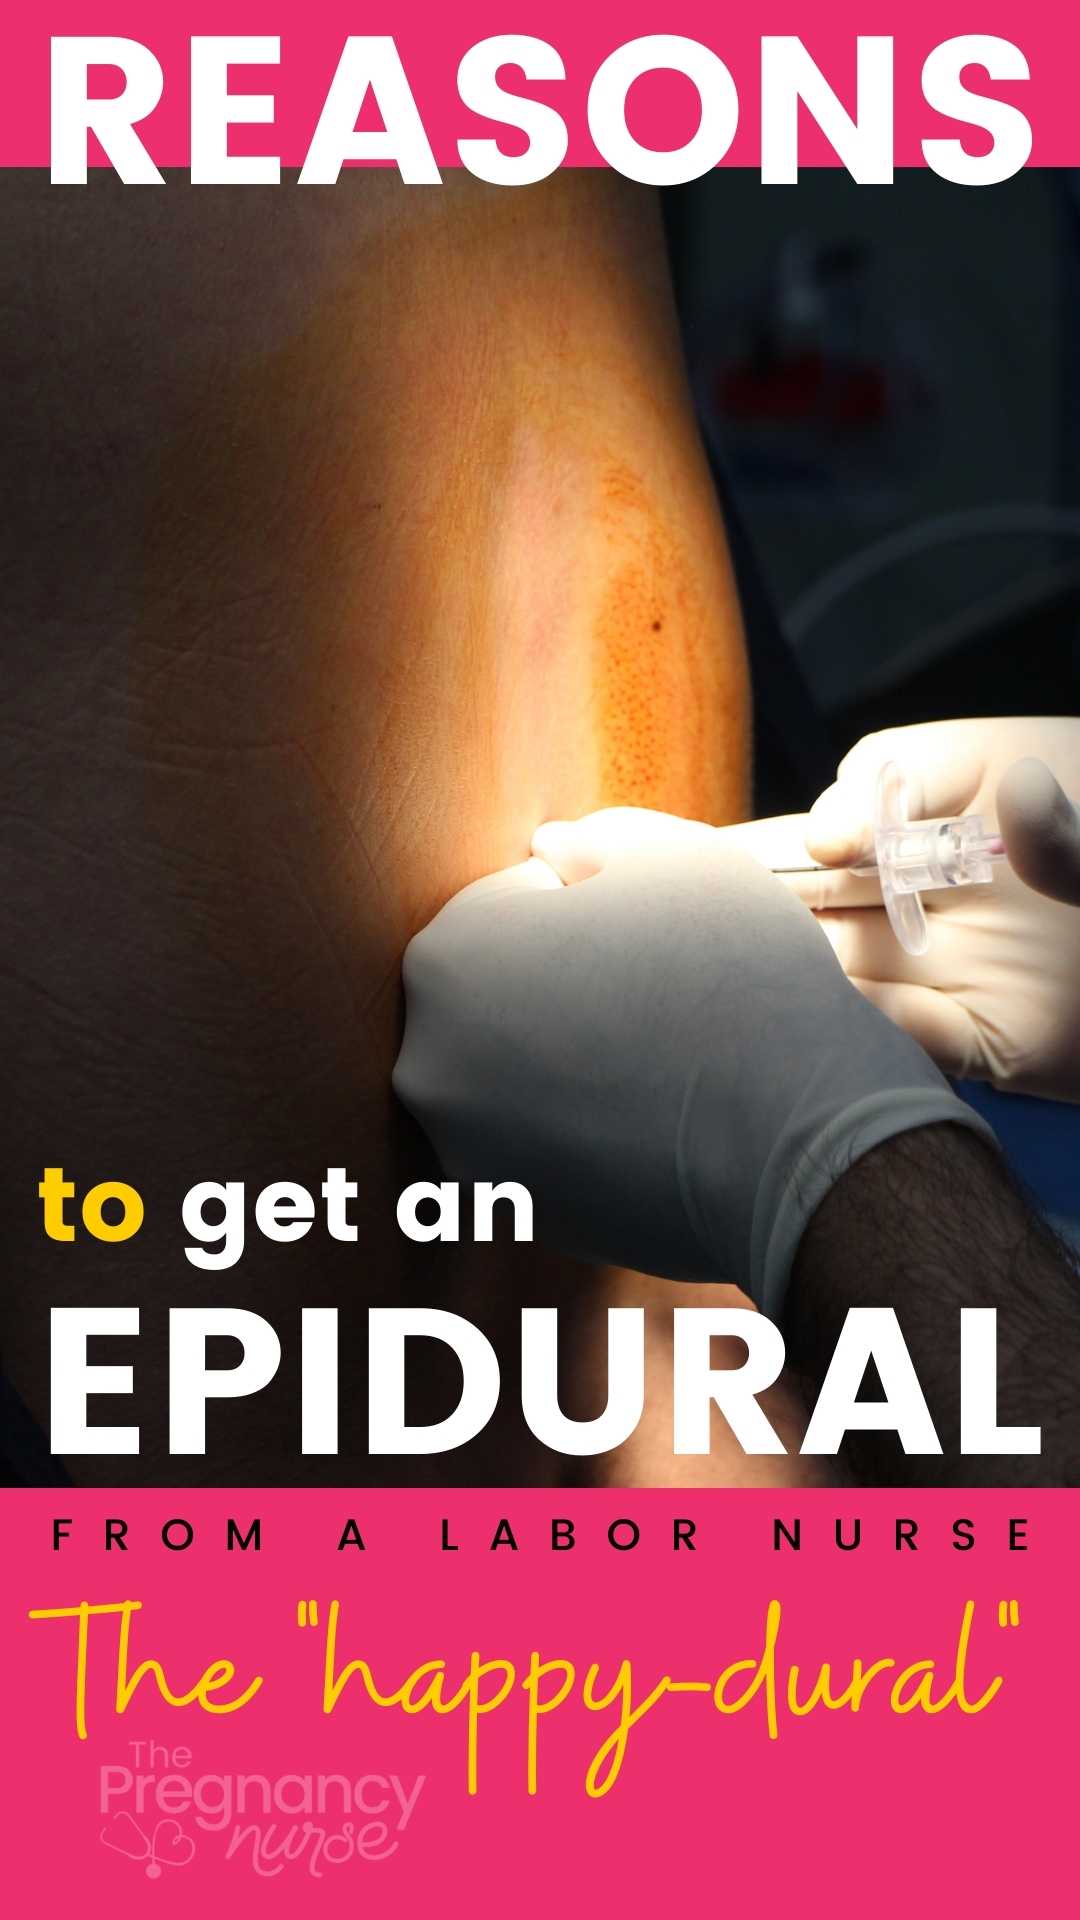 There's lots of reasons to get an epidural -- be it pain, rest, or you just want to enjoy your birth more. All are valid.